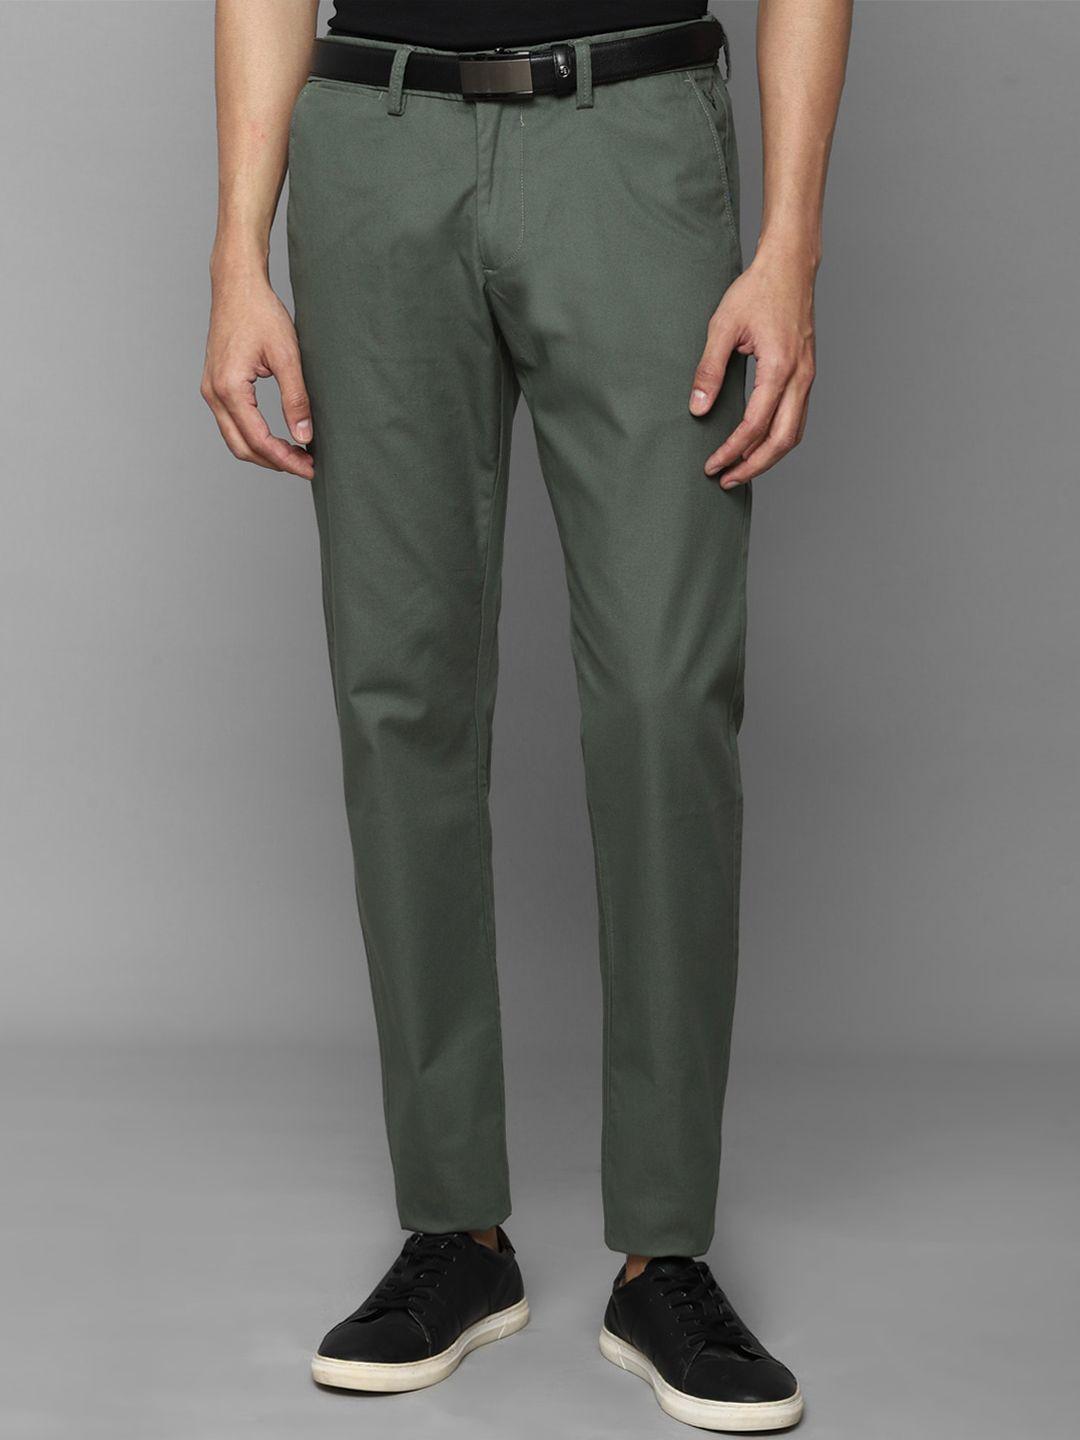 allen solly men olive green slim fit chinos trousers